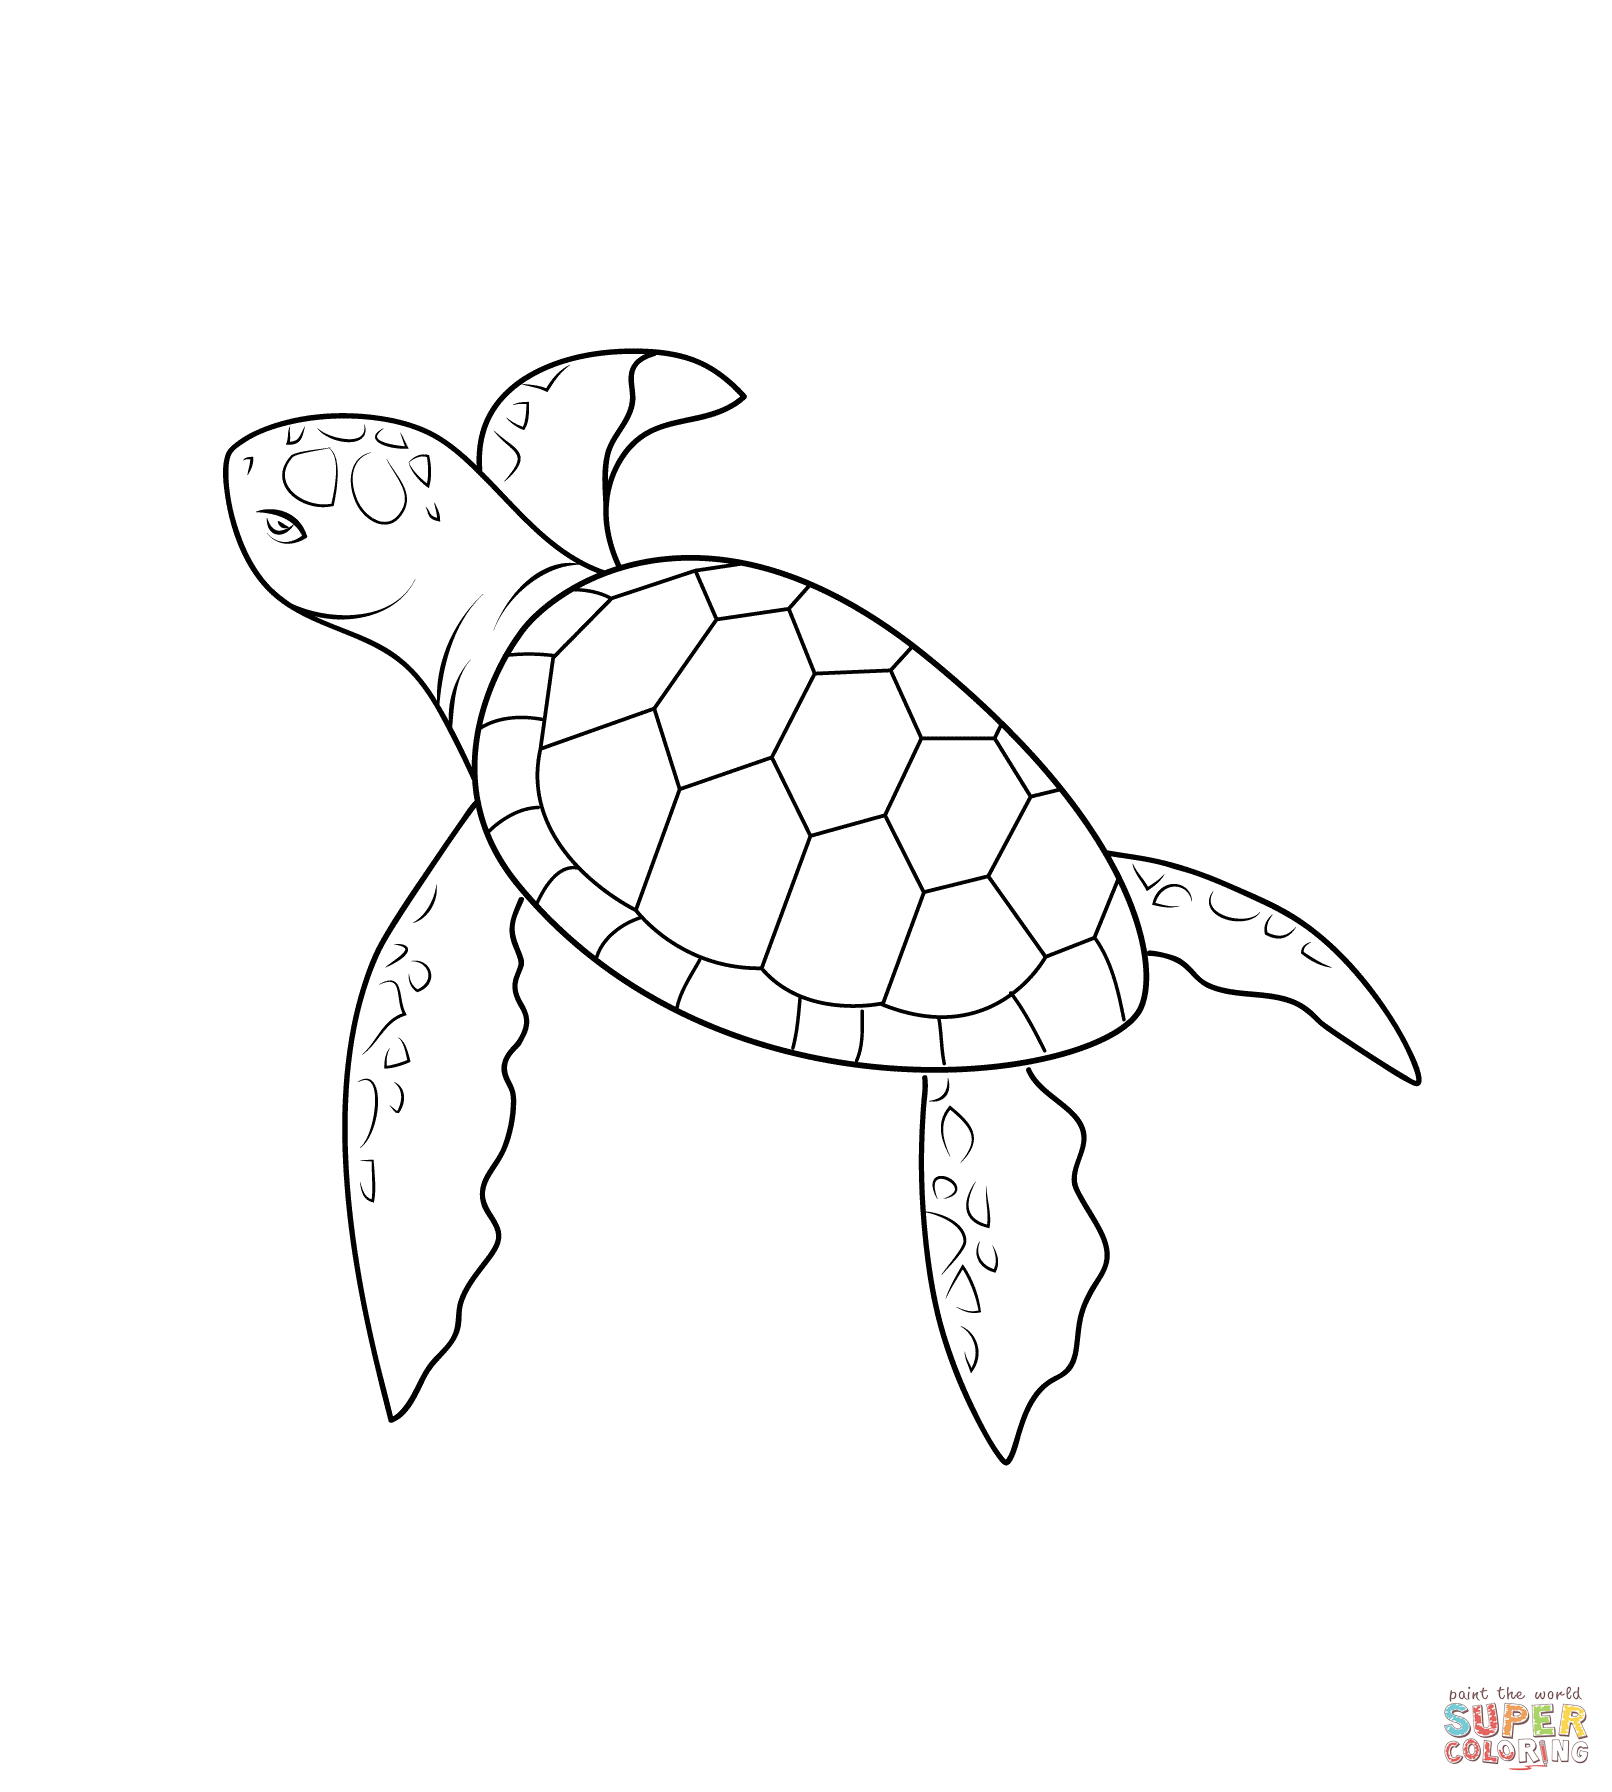 Baby Turtle coloring page | Free Printable Coloring Pages